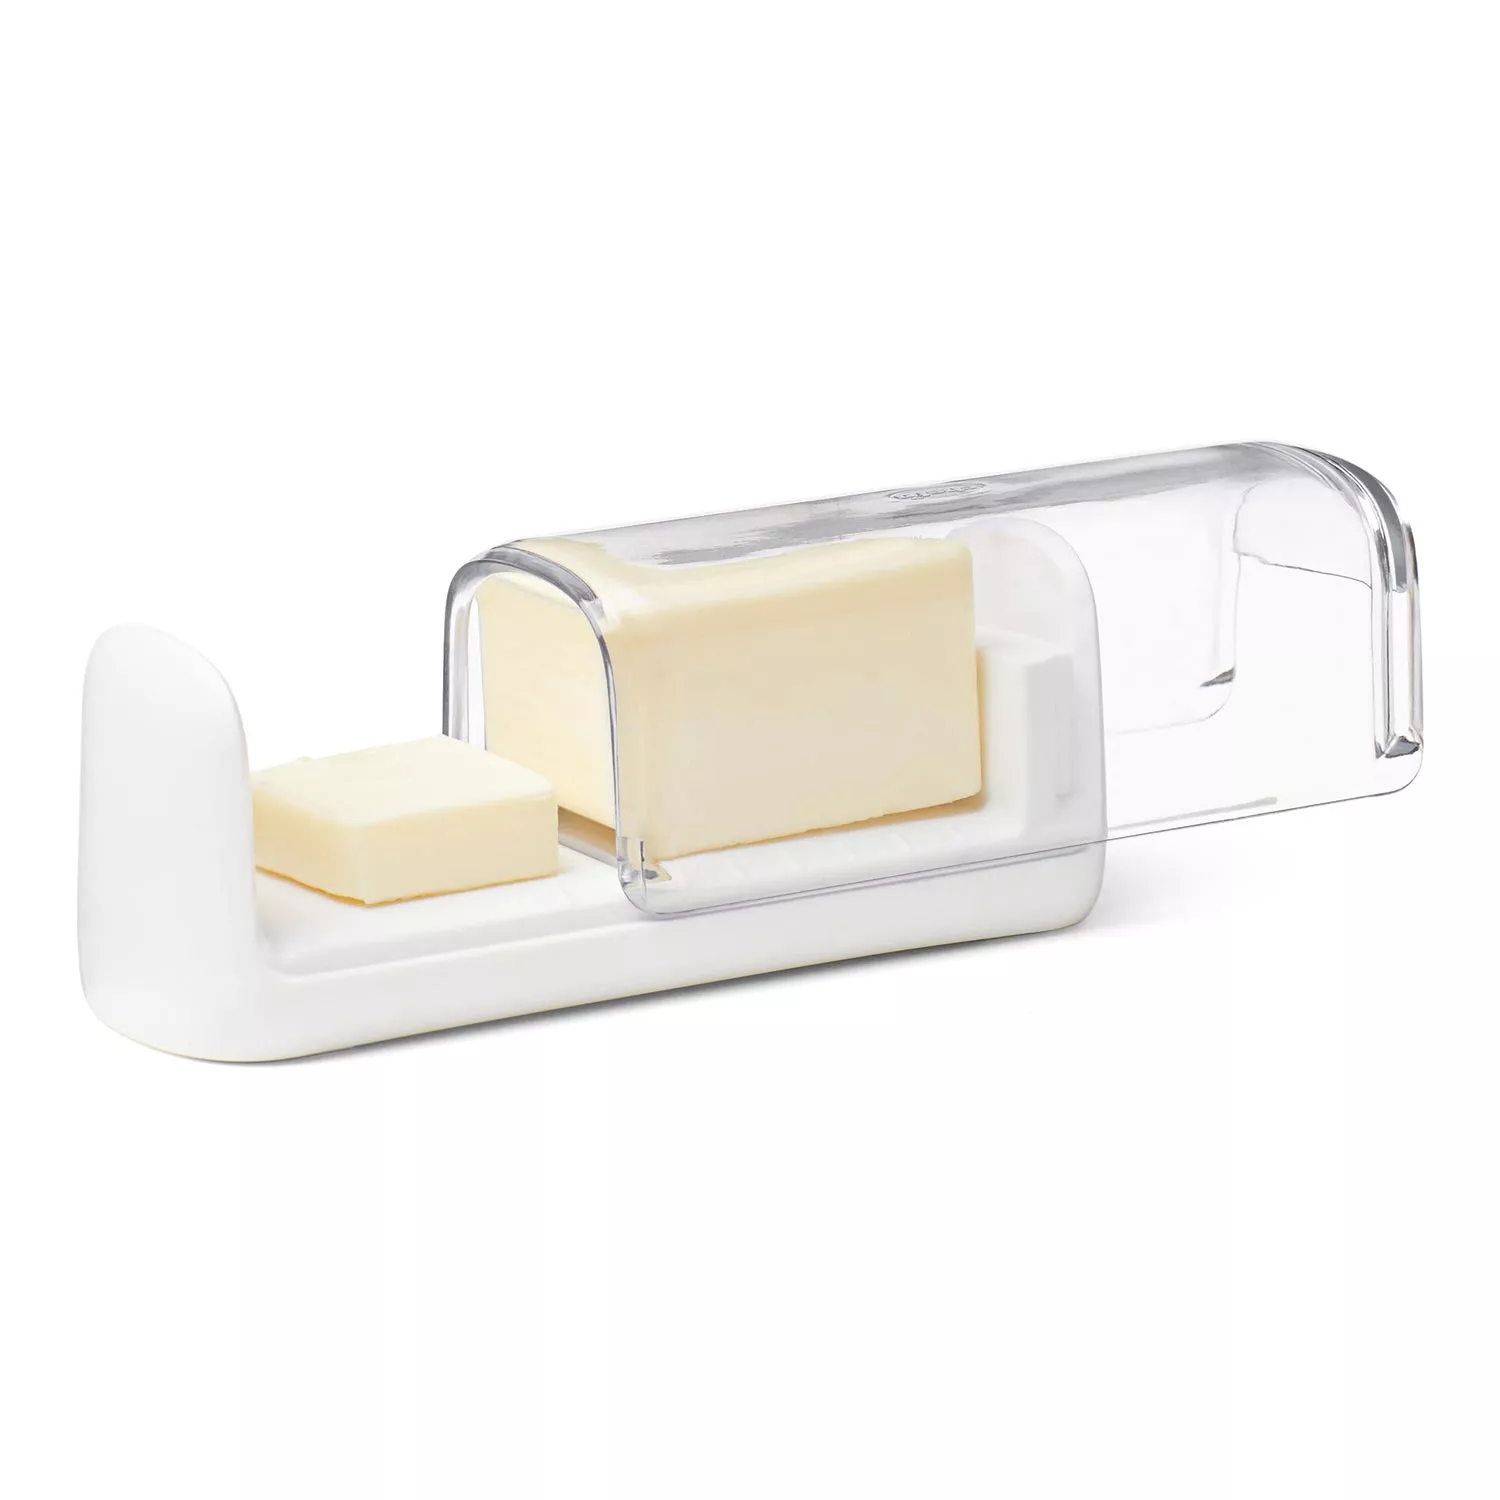 OXO Good Grips Stainless Steel Butter Dish: Butter Dishes